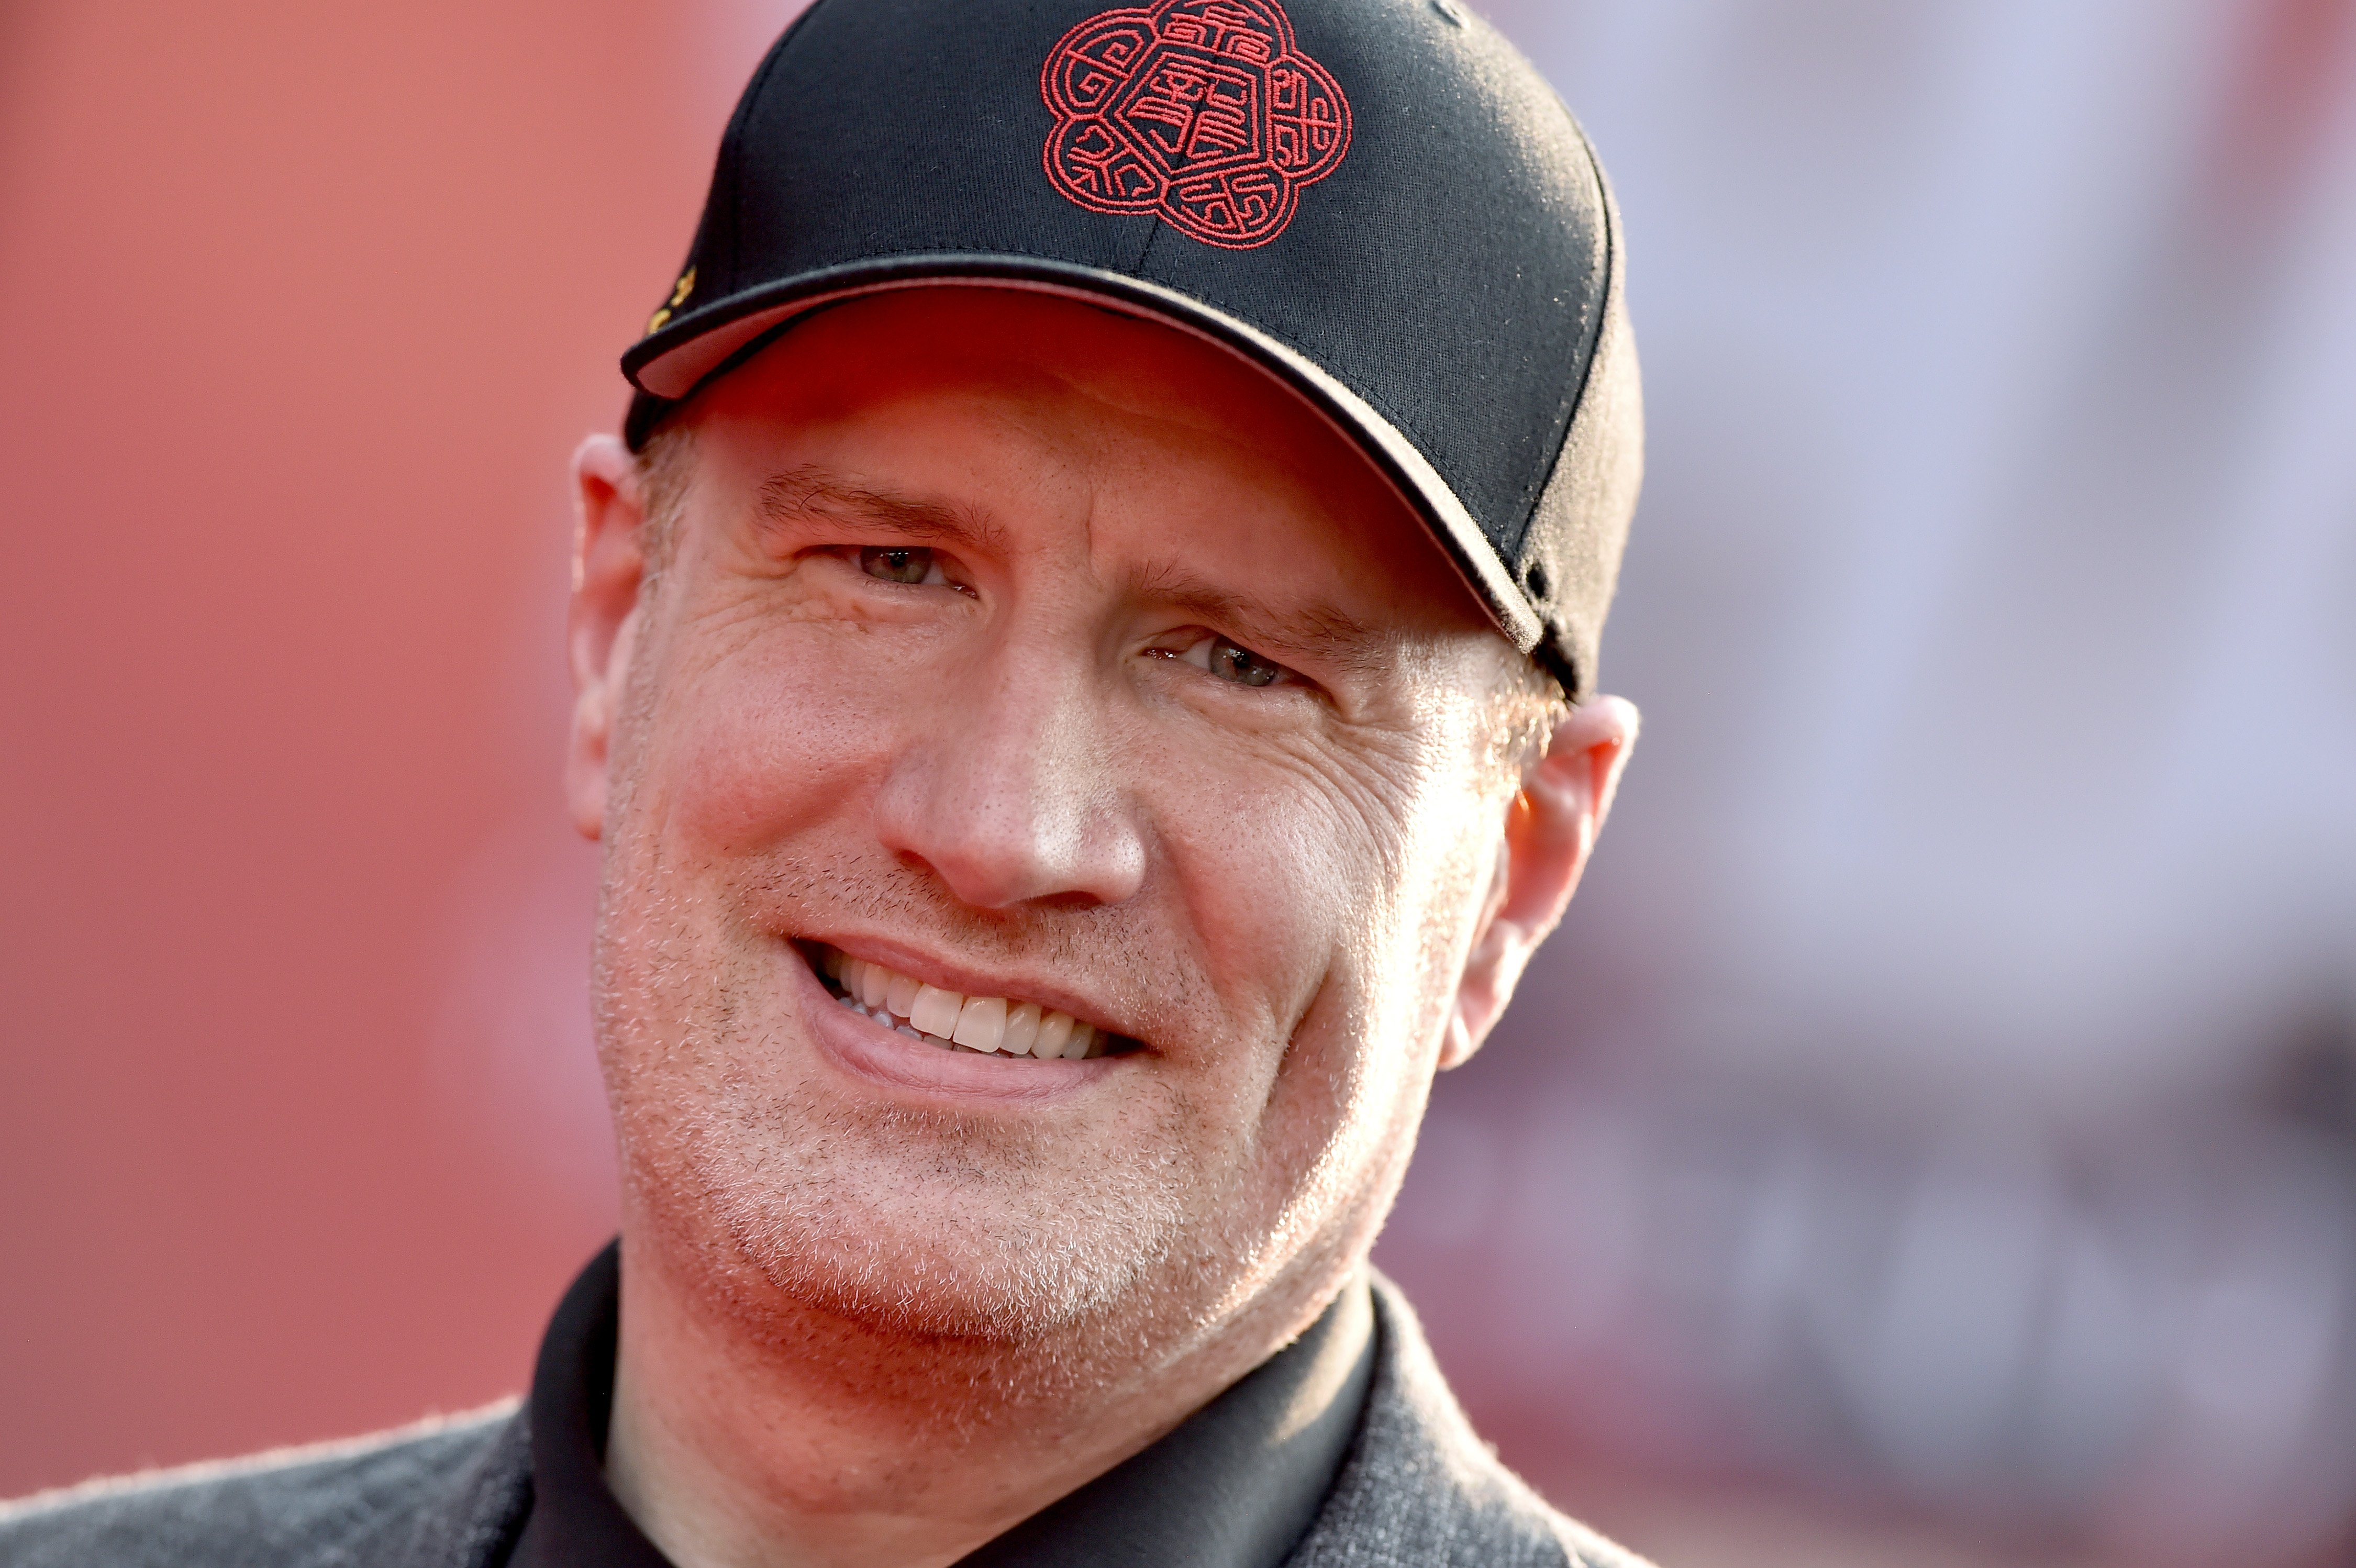 Kevin Feige smiles and wears a hat at the premiere of 'Shang-Chi and the Legend of the Ten Rings.'